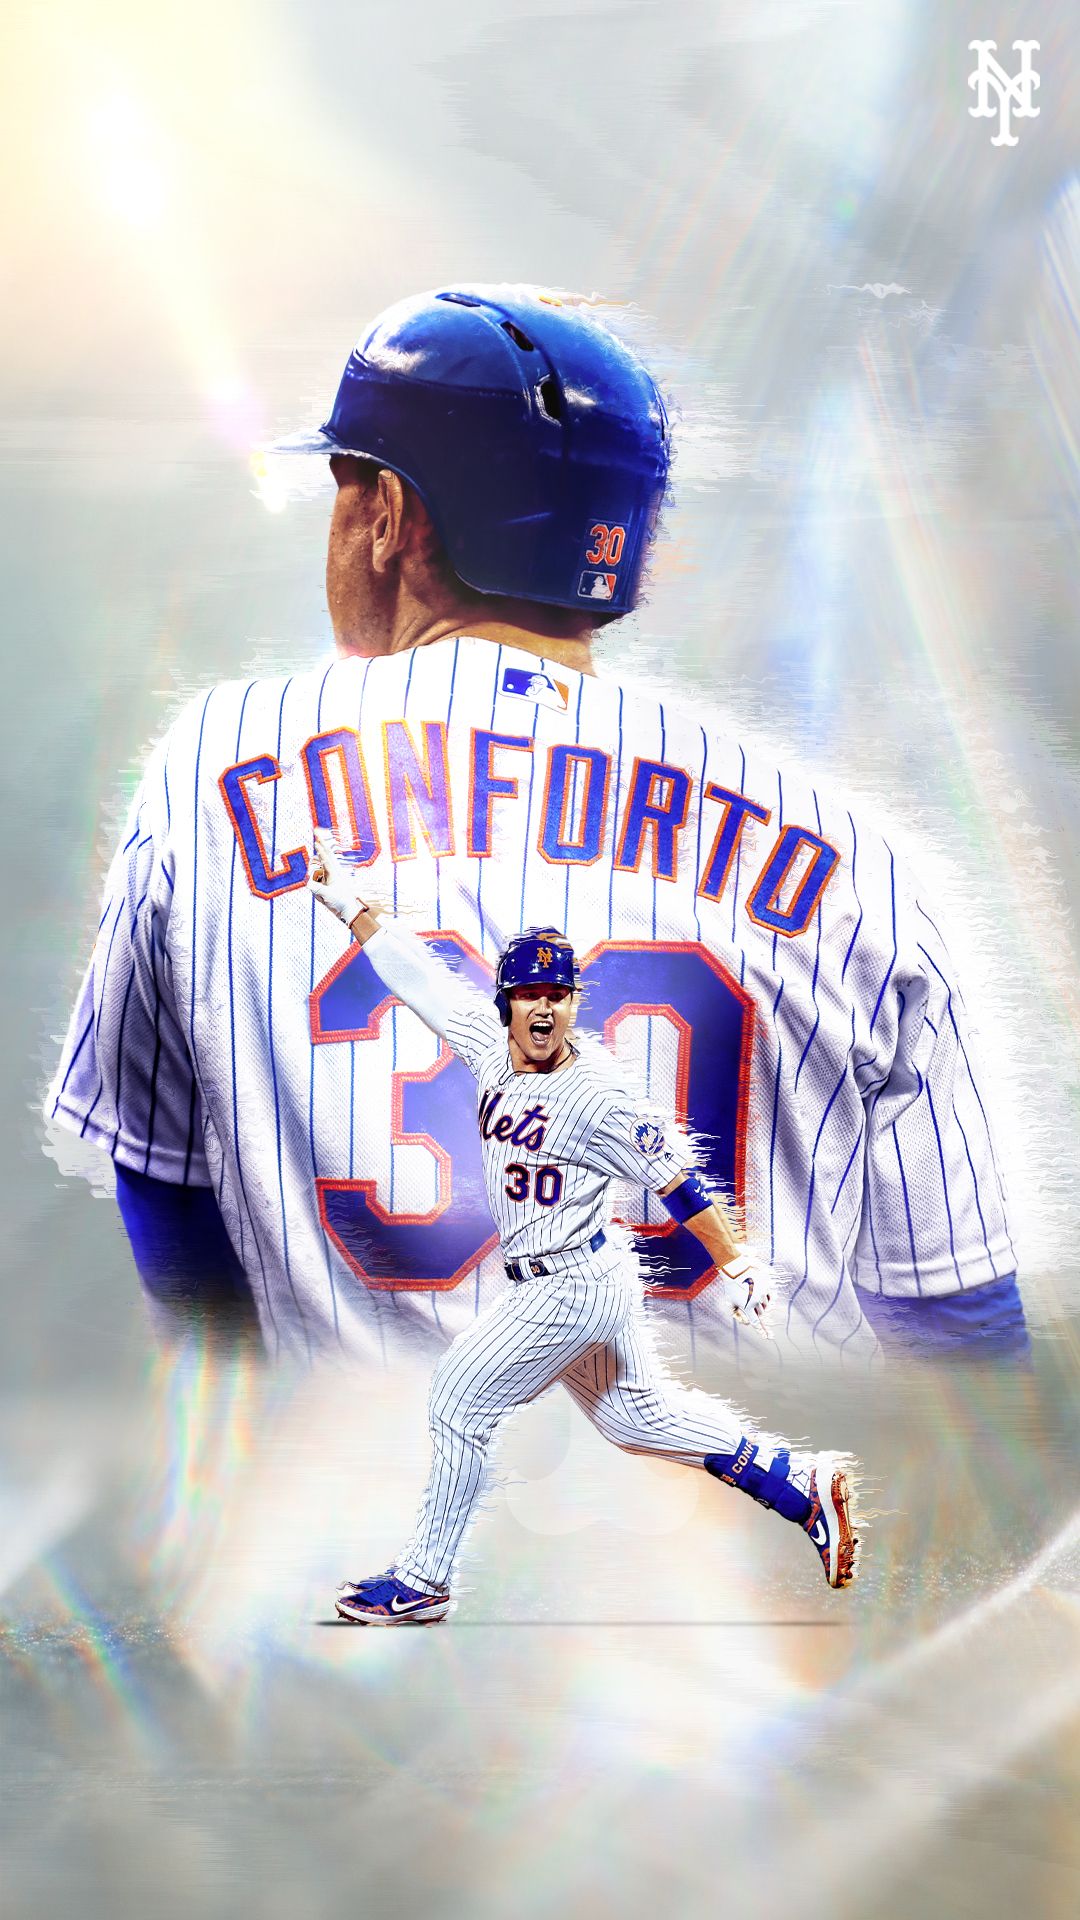 10 New York Mets HD Wallpapers and Backgrounds